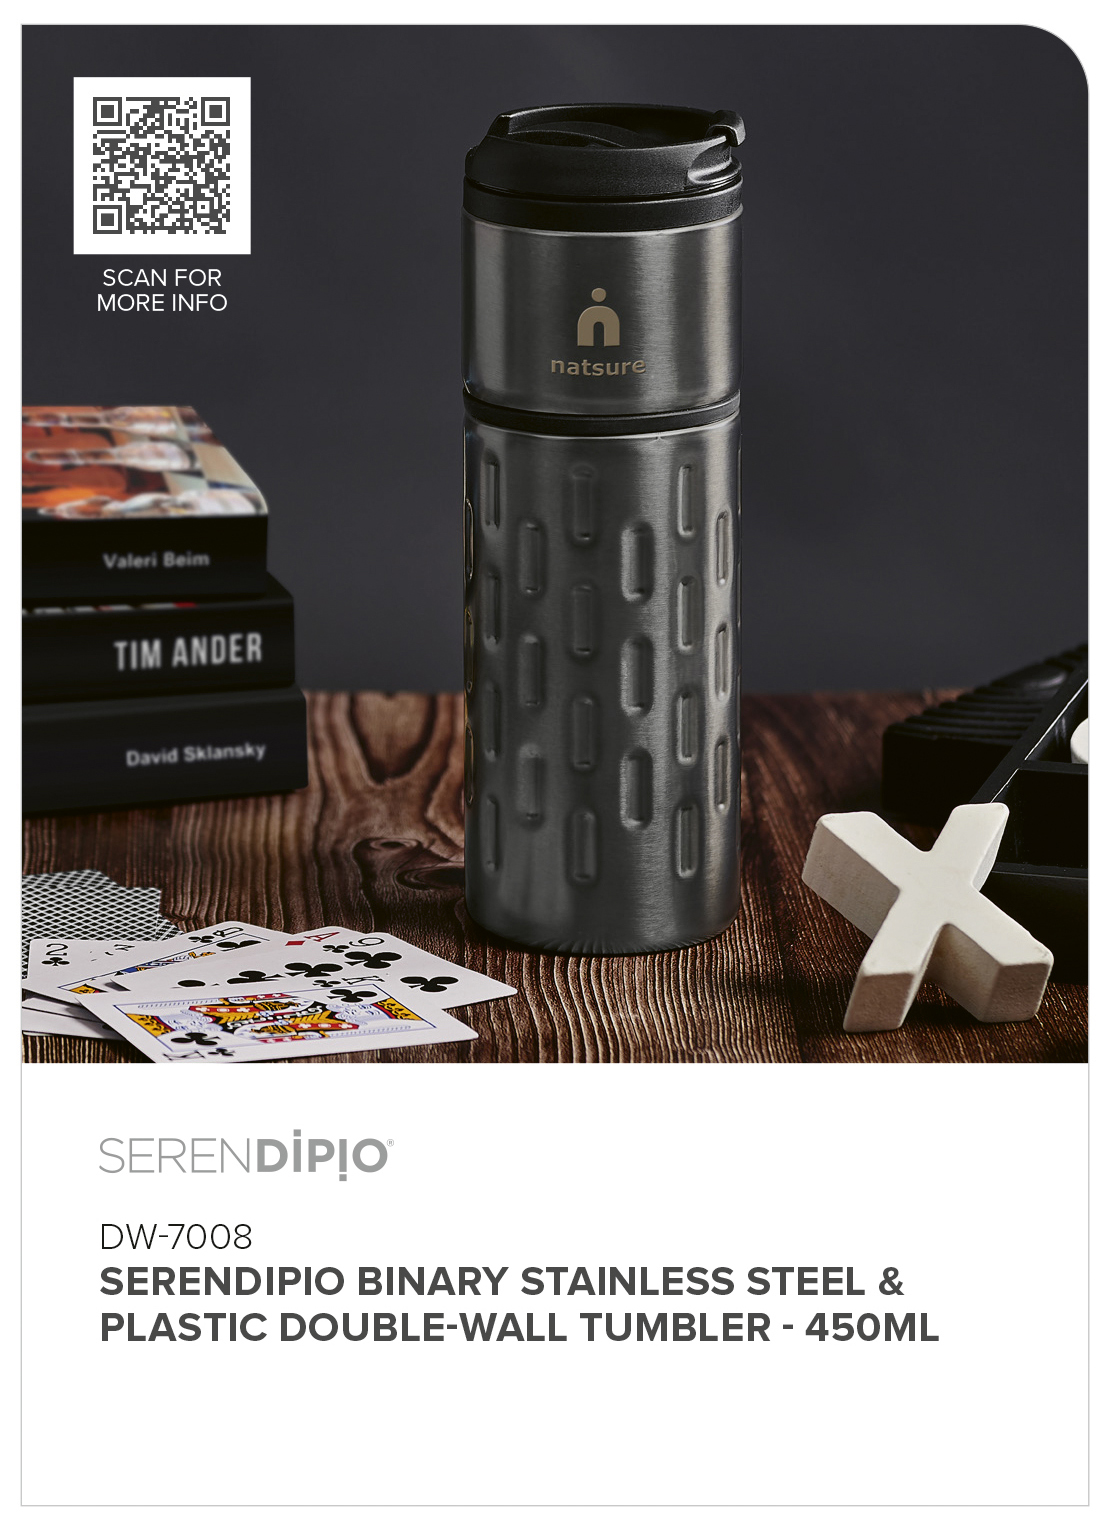 DW-7008 - Serendipio Binary Stainless Steel & Plastic Double-Wall Tumbler - 450ml - Catalogue Image